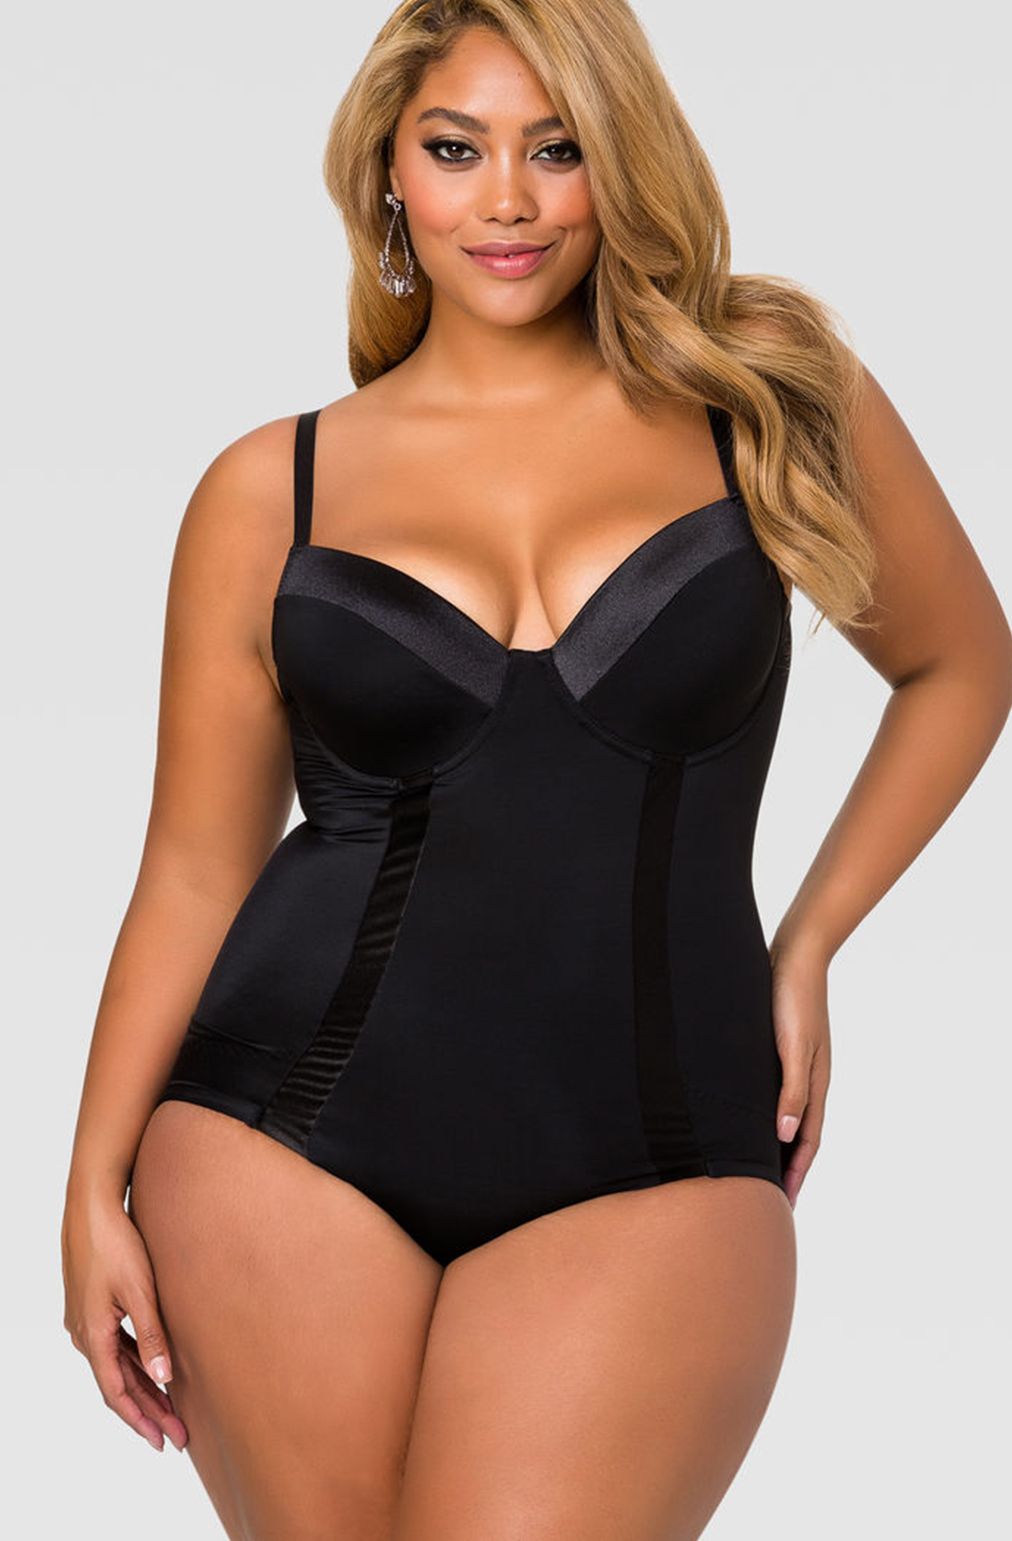 Shapewear for Women Plus Size Lace Bodysuits Red and Black